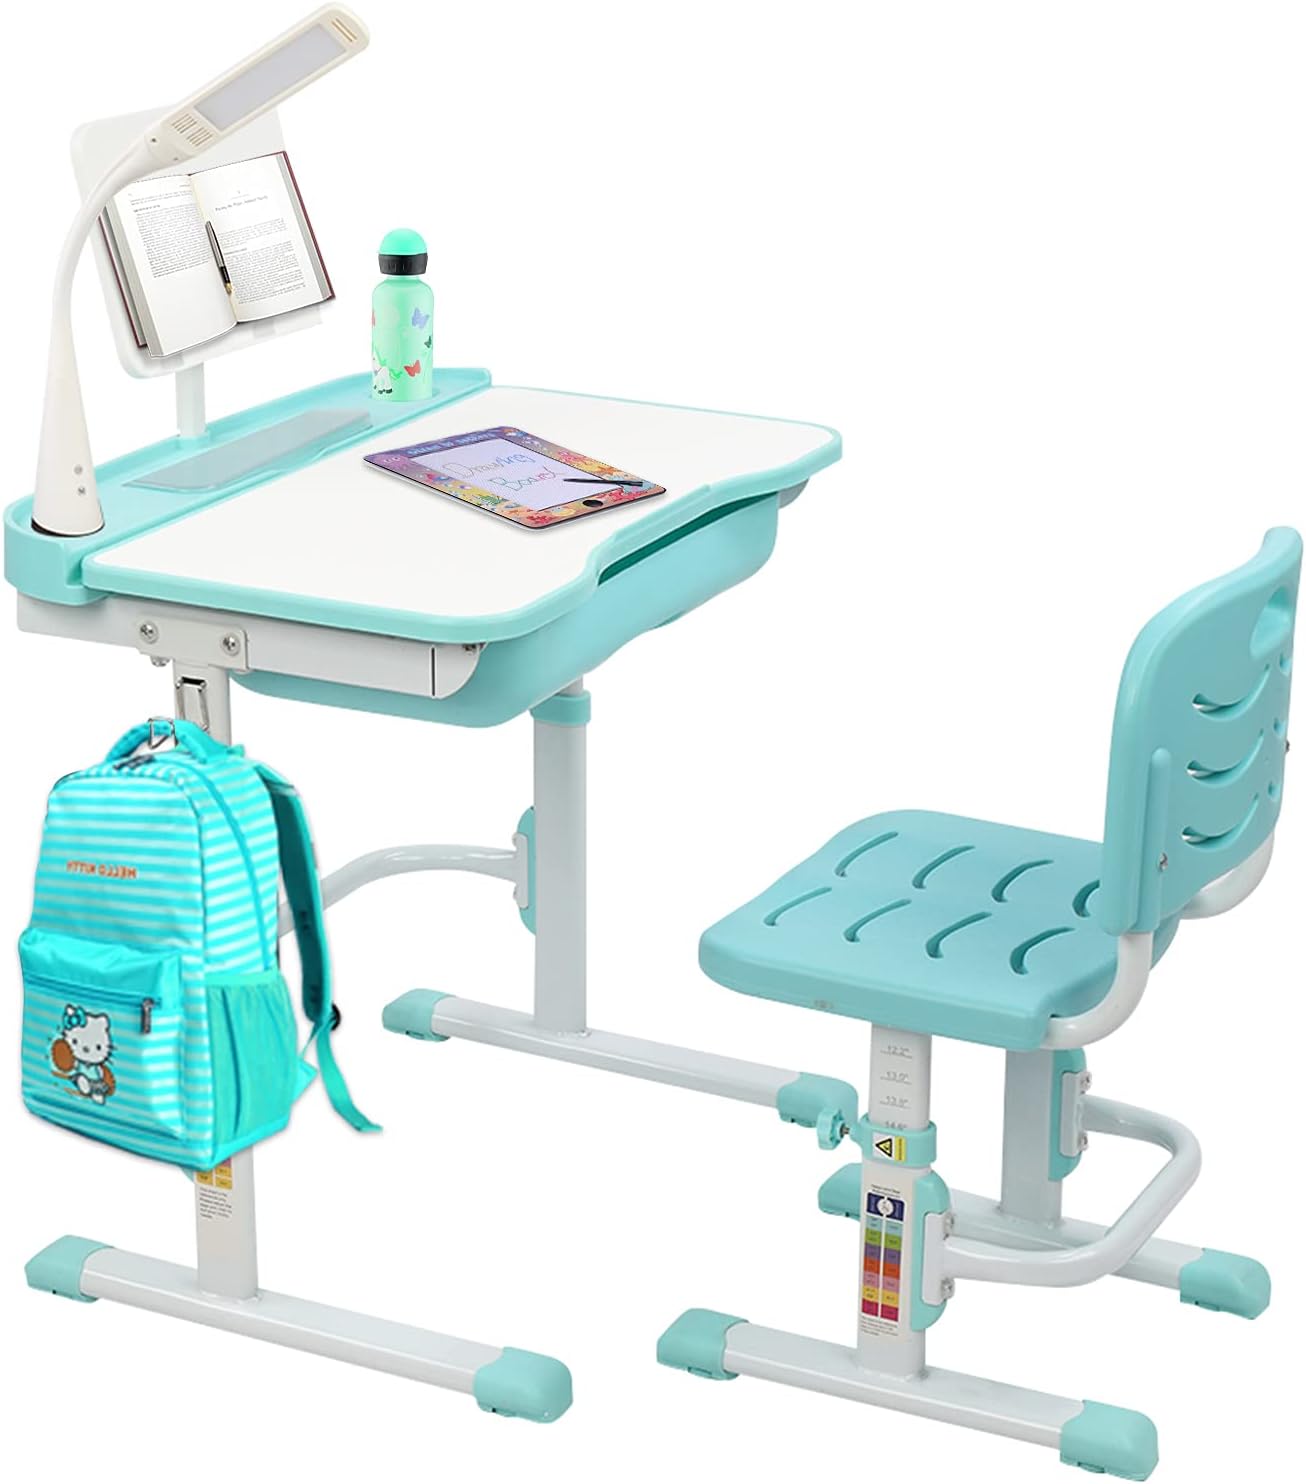 FDW BELANITAS Kids' Desks,Height Adjustable Kids Desks and Chair Set for Boys and Girls,Kids Writing Chair and Desk w/Lamp